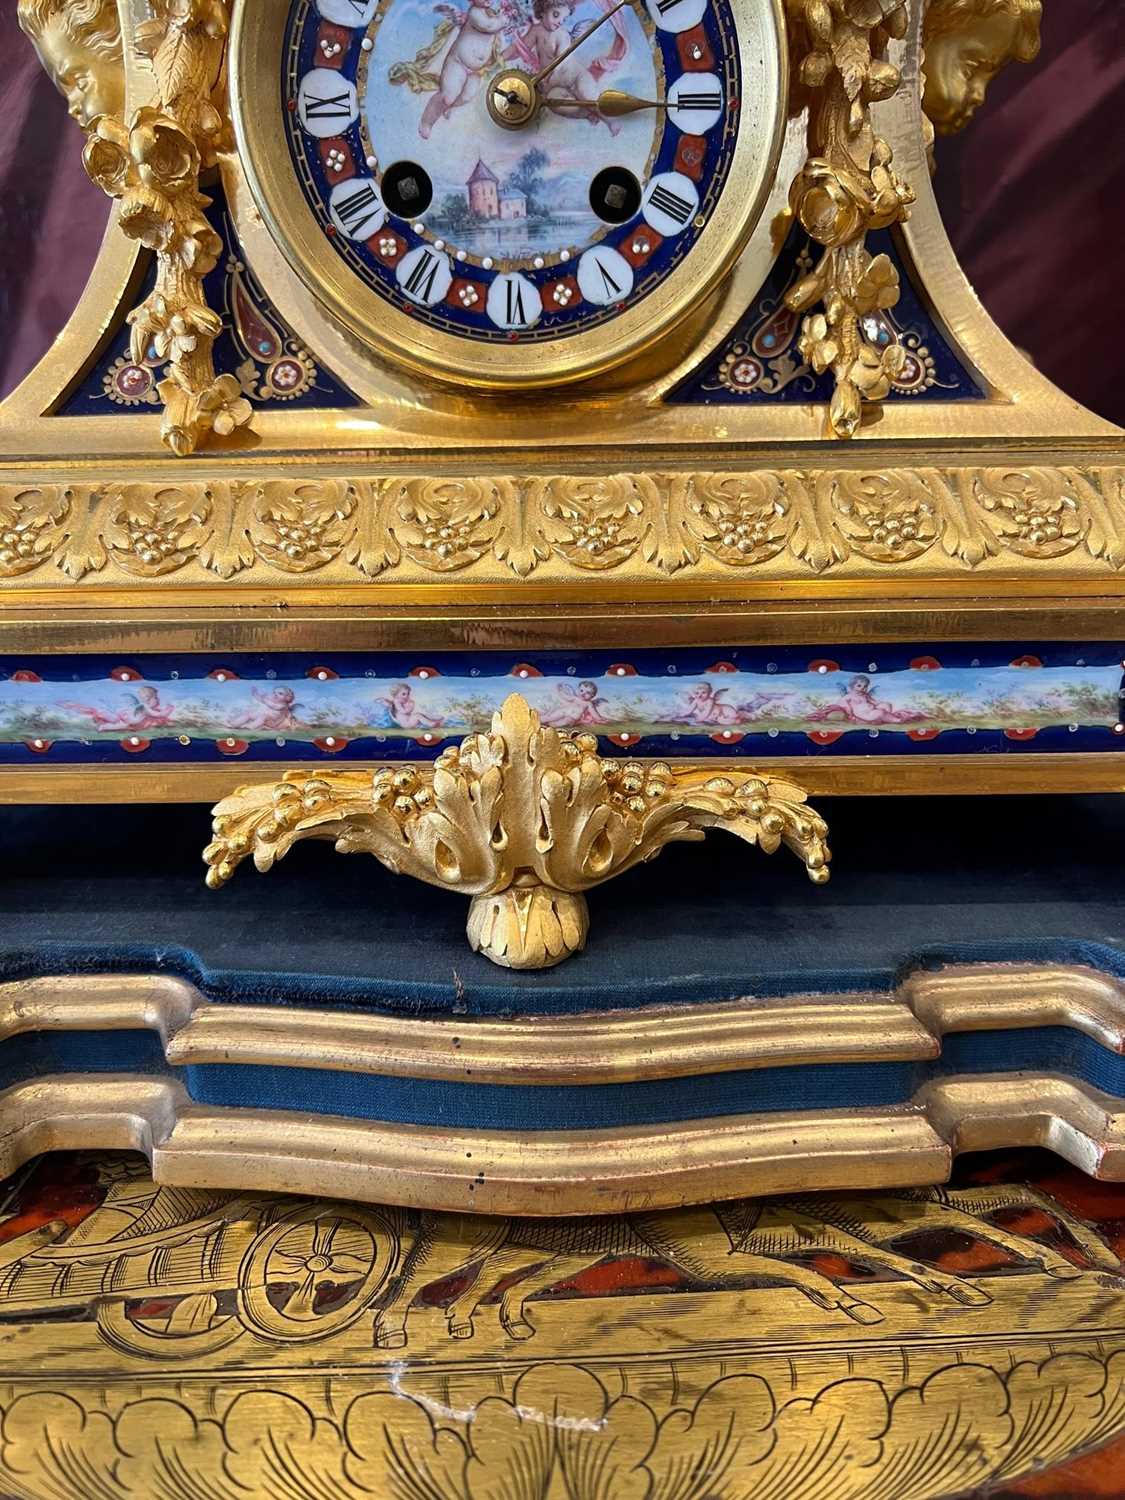 AN EXCEPTIONAL QUALITY LATE 19TH CENTURY FRENCH ORMOLU AND SEVRES STYLE PORCELAIN CLOCK SET - Image 12 of 16